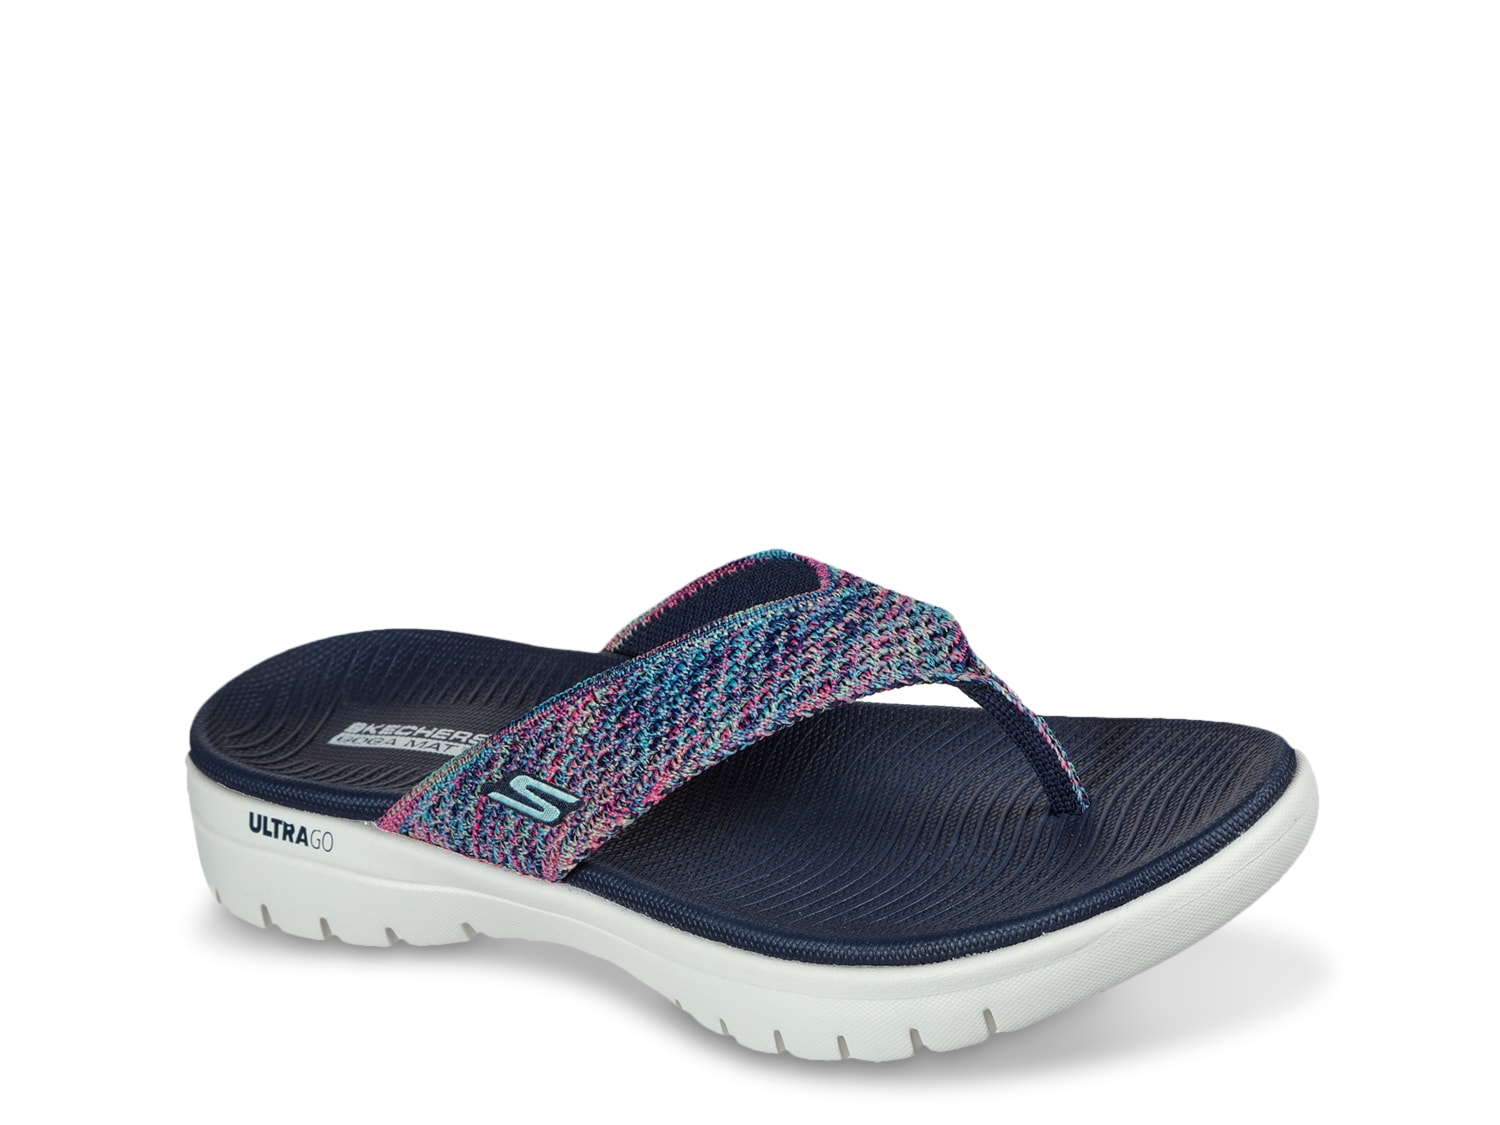 Skechers On-The-Go Flex Accent Flip Flop - Free Shipping | DSW